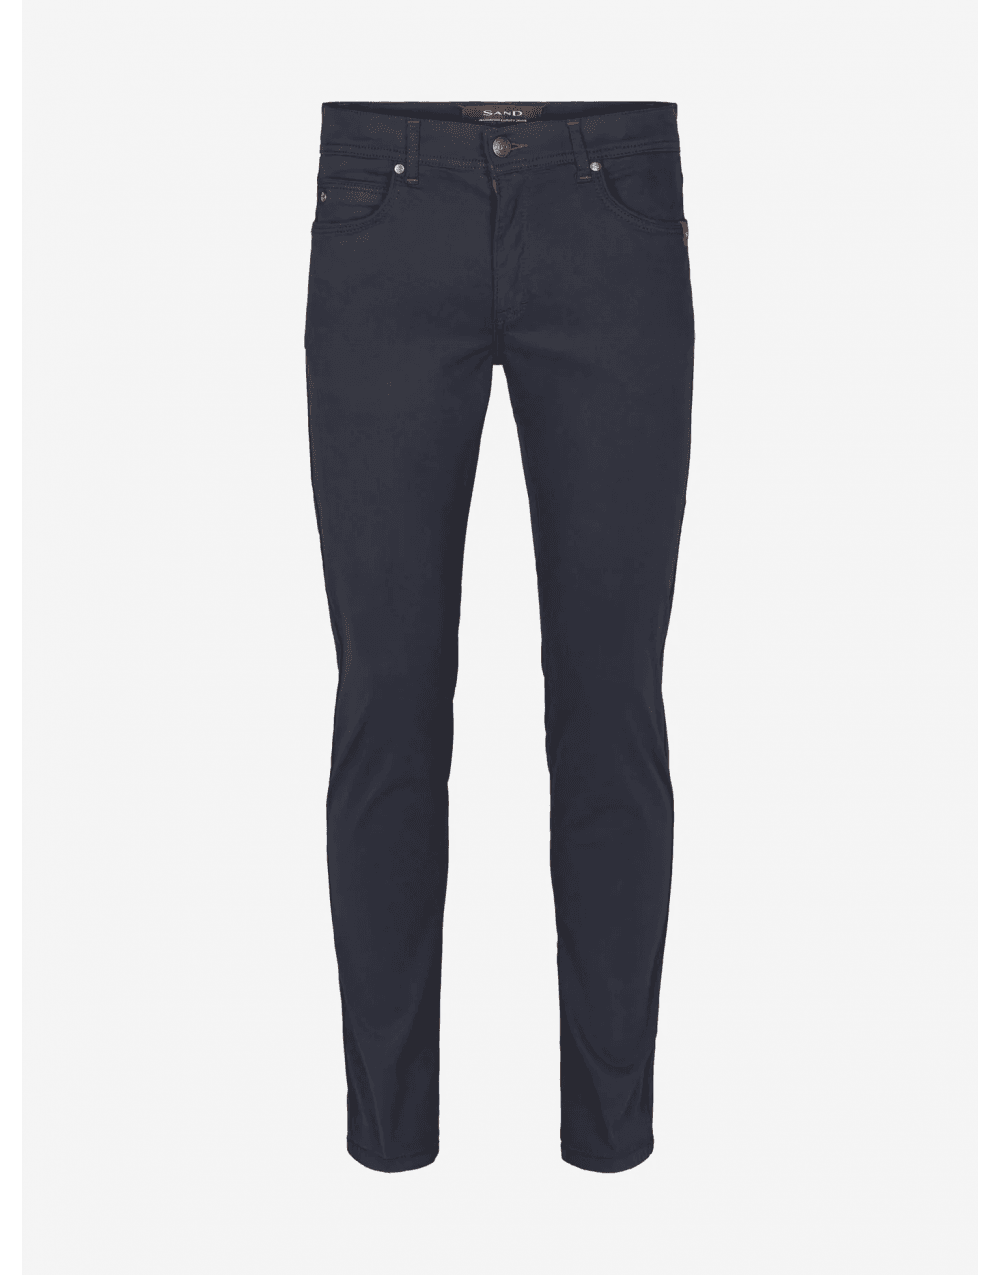 SAND Burton Suede Touch Trousers Col: 590 Navy, Size: 31/34